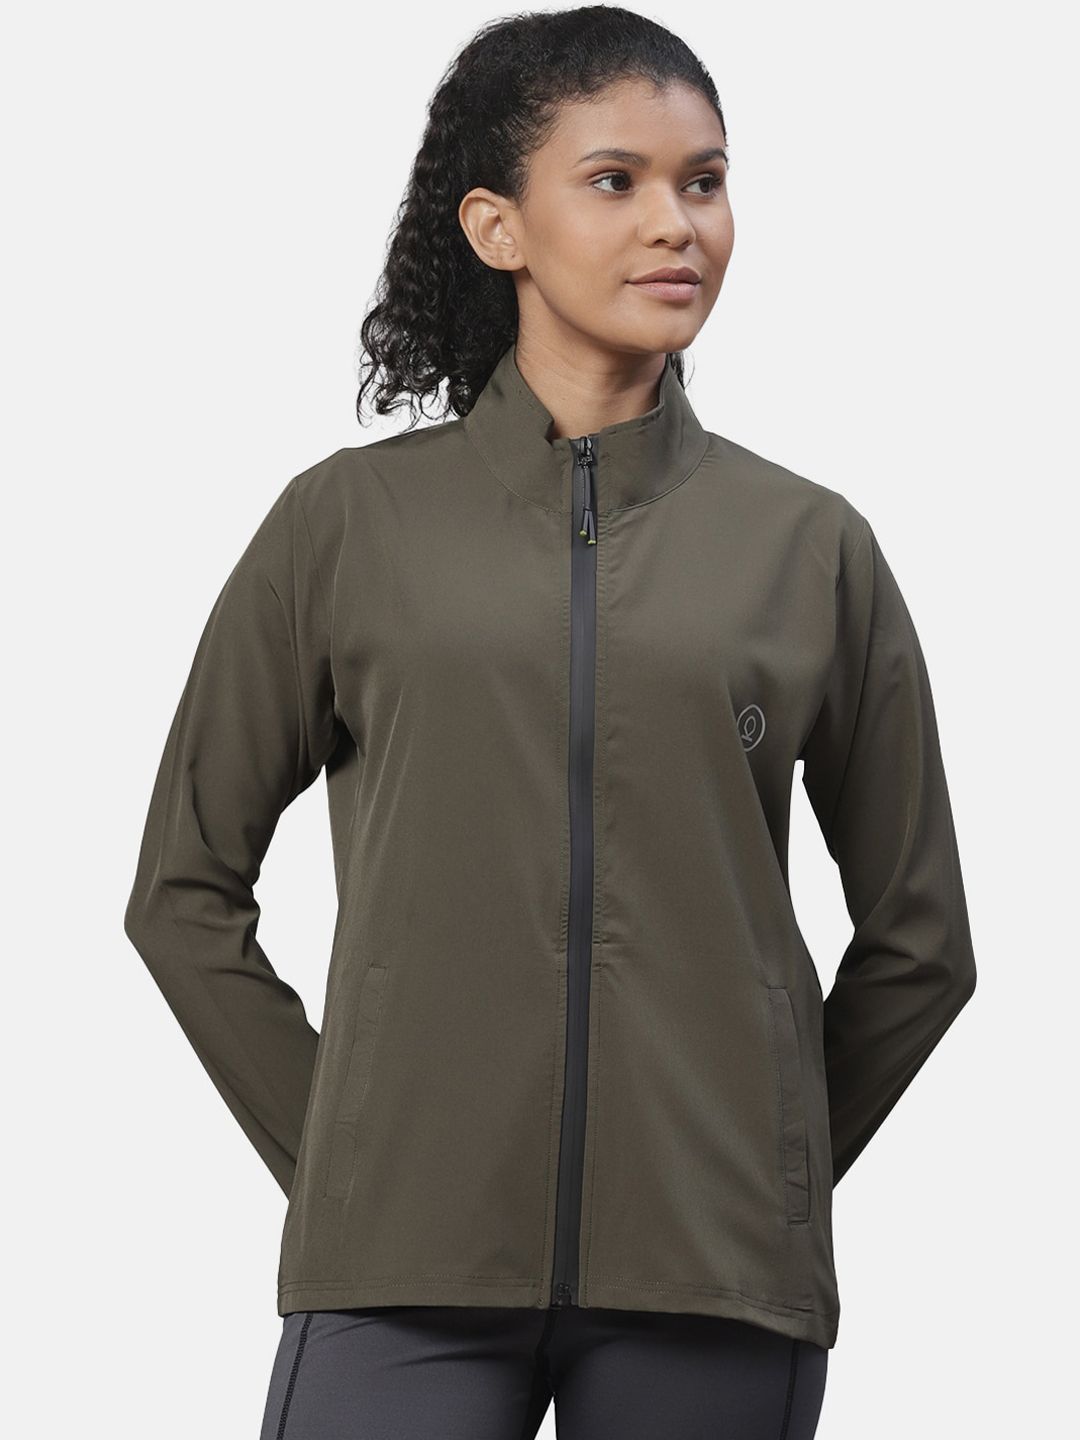 Chkokko Women Olive Green Lightweight Outdoor Sporty Jacket Price in India